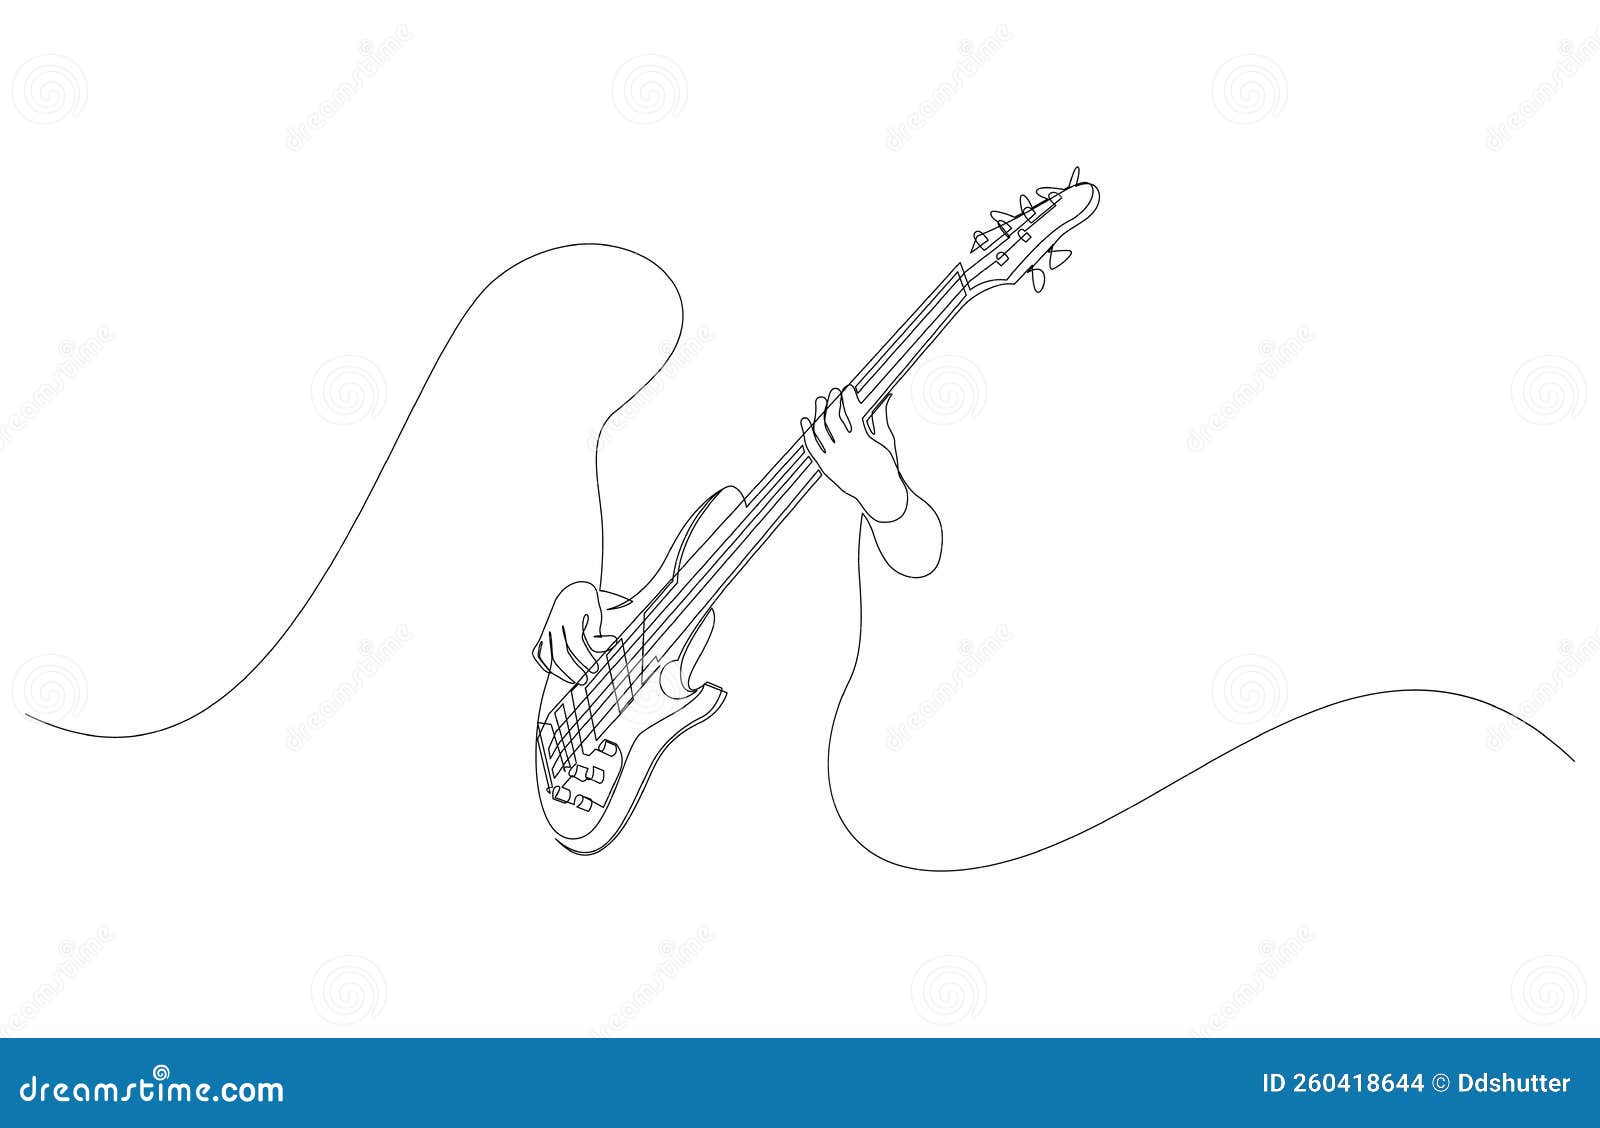 How to Draw a Guitar | A Step-by-Step Tutorial for Kids